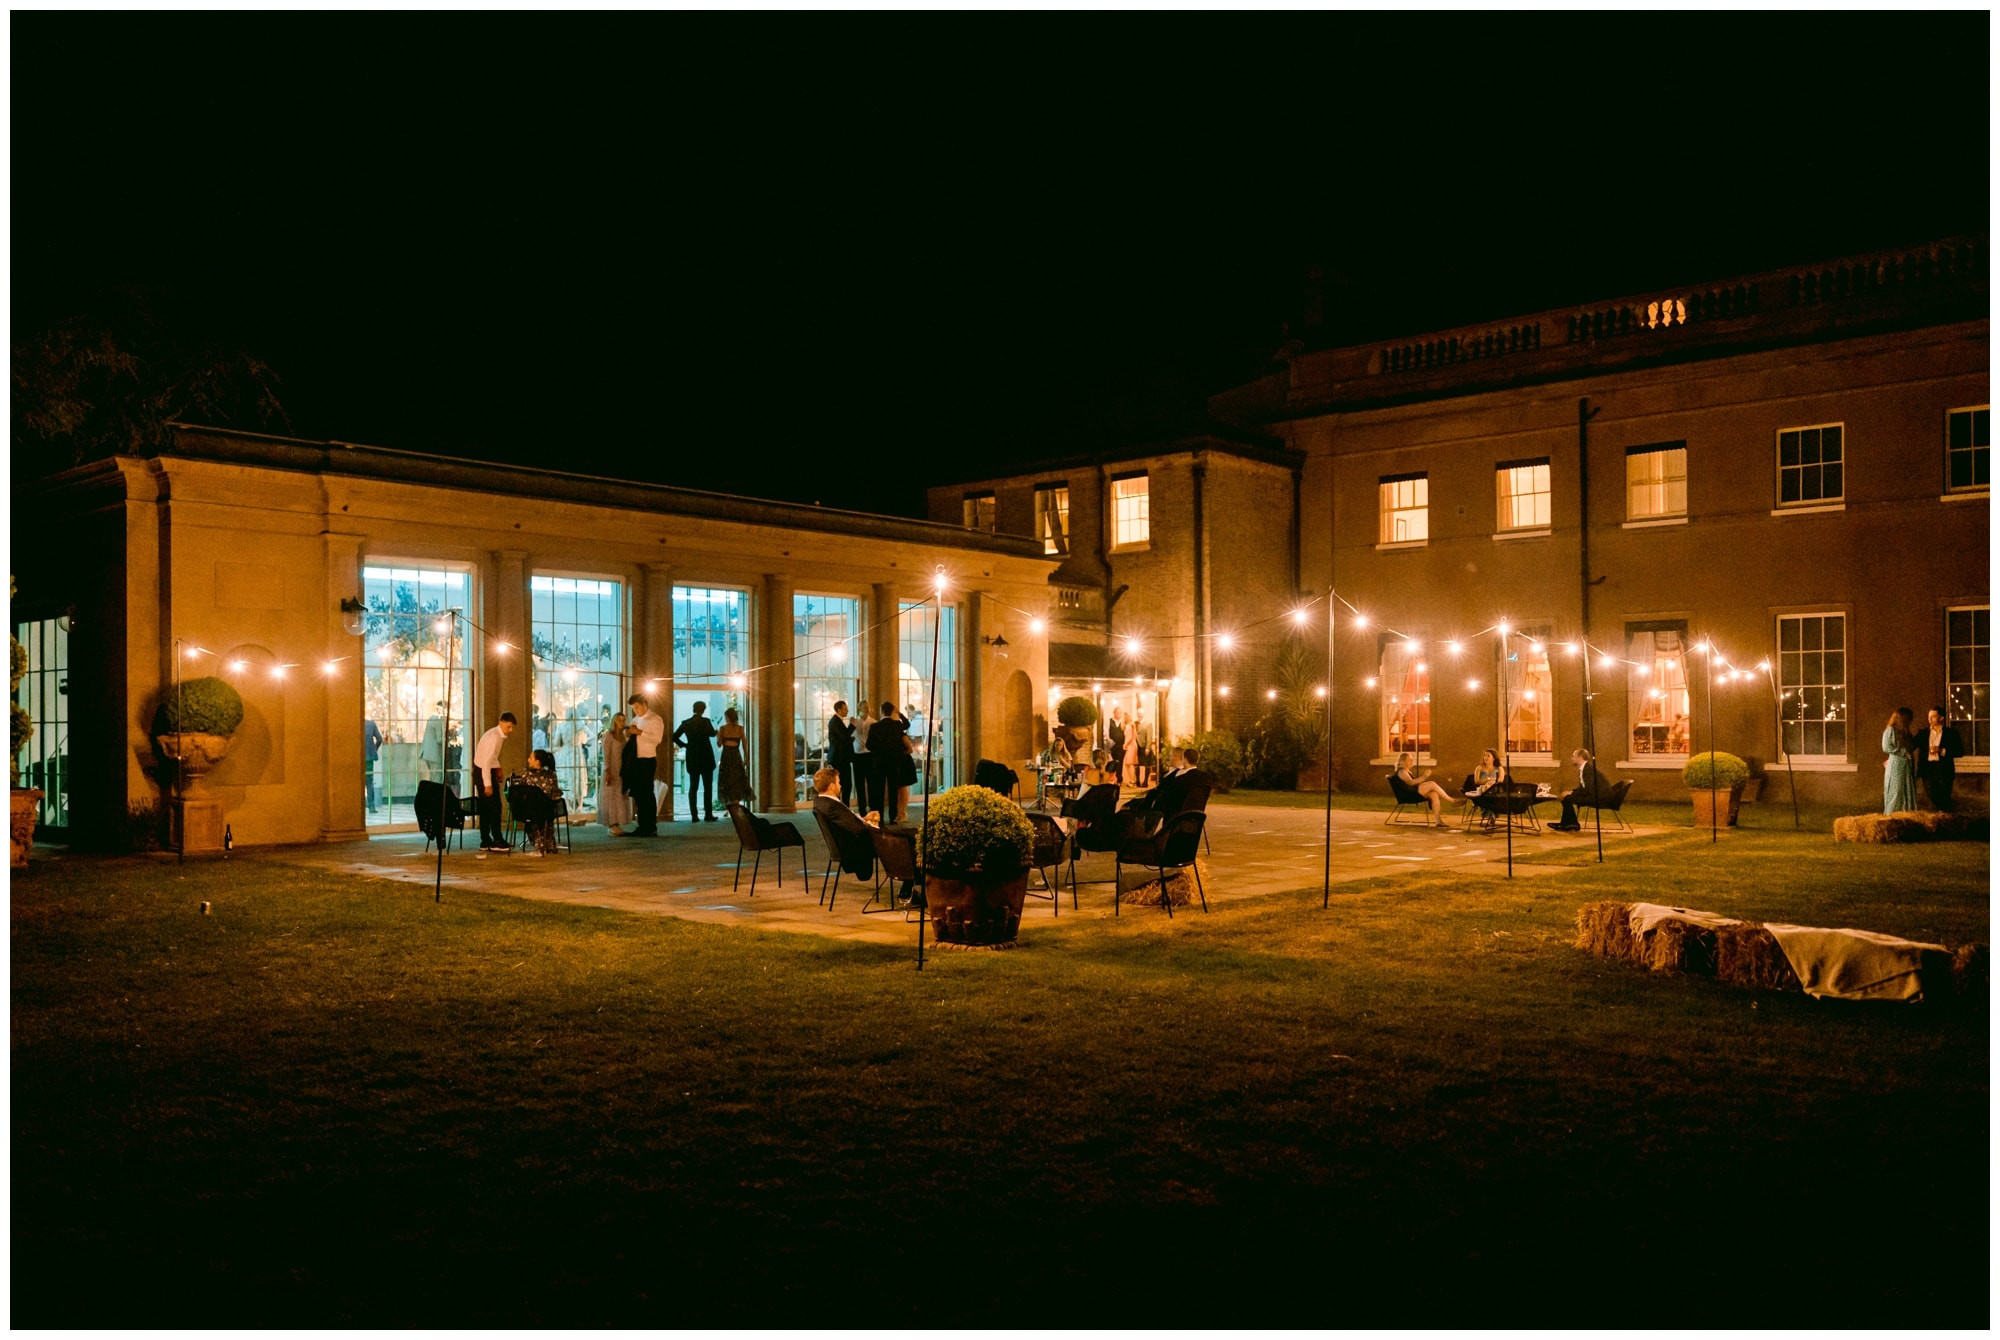 sibton park Wedding Photography venue at night lite up by dreamwave Group festoons 